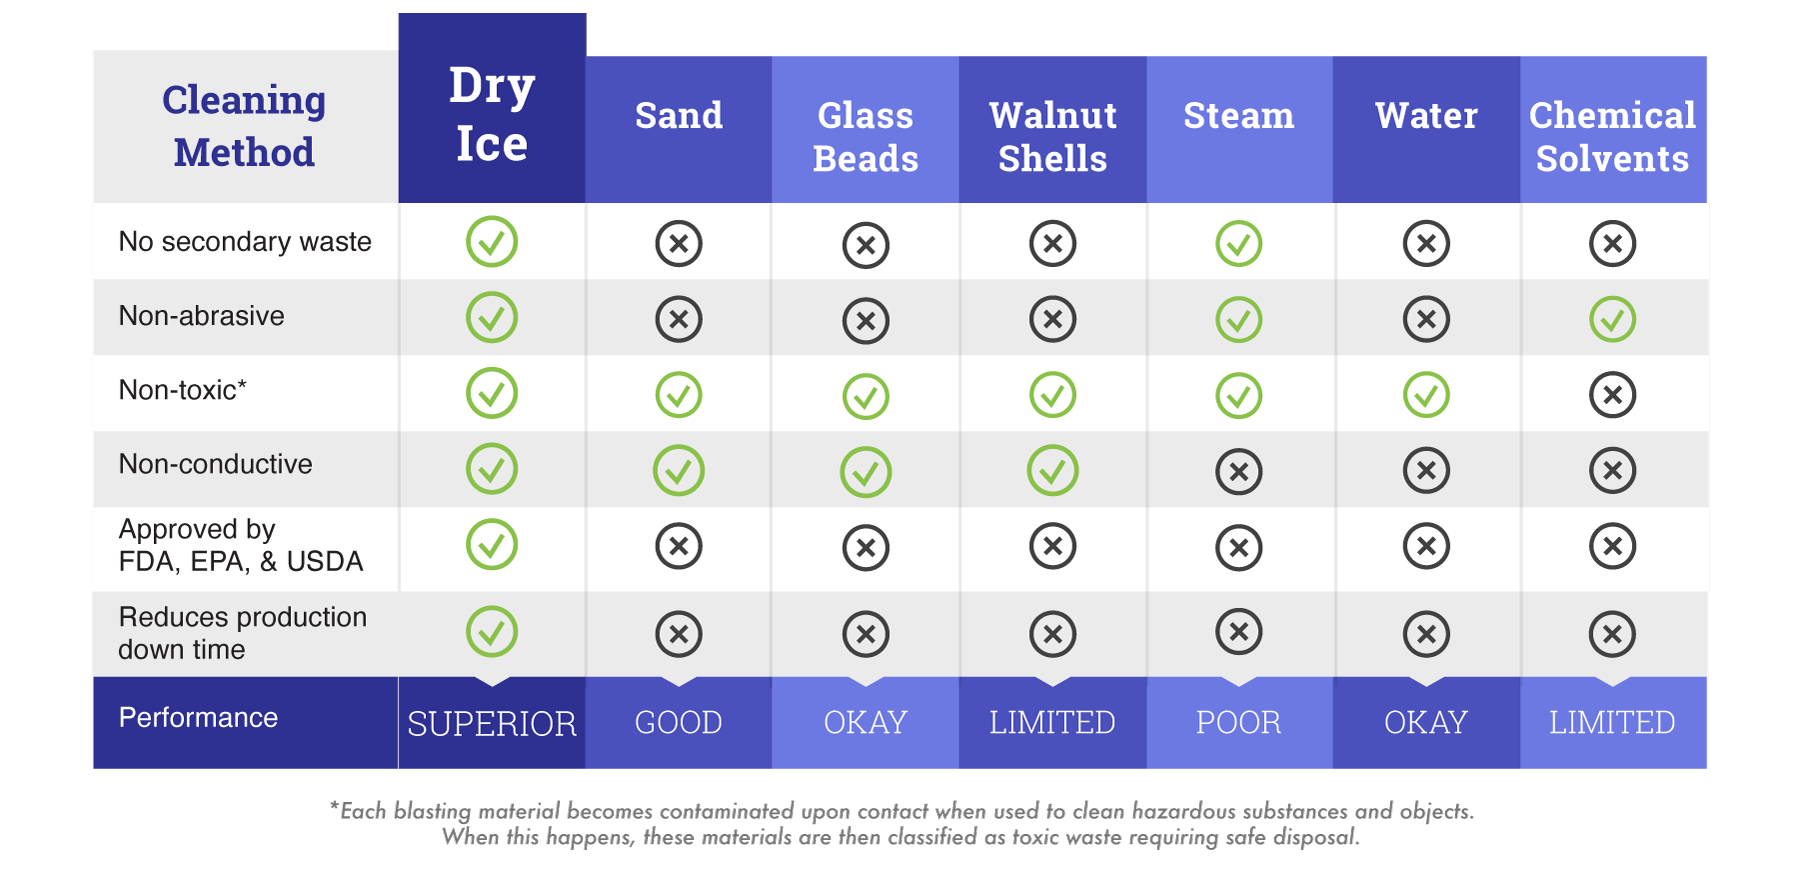 How Dry Ice Compares To Other Cleaning Methods